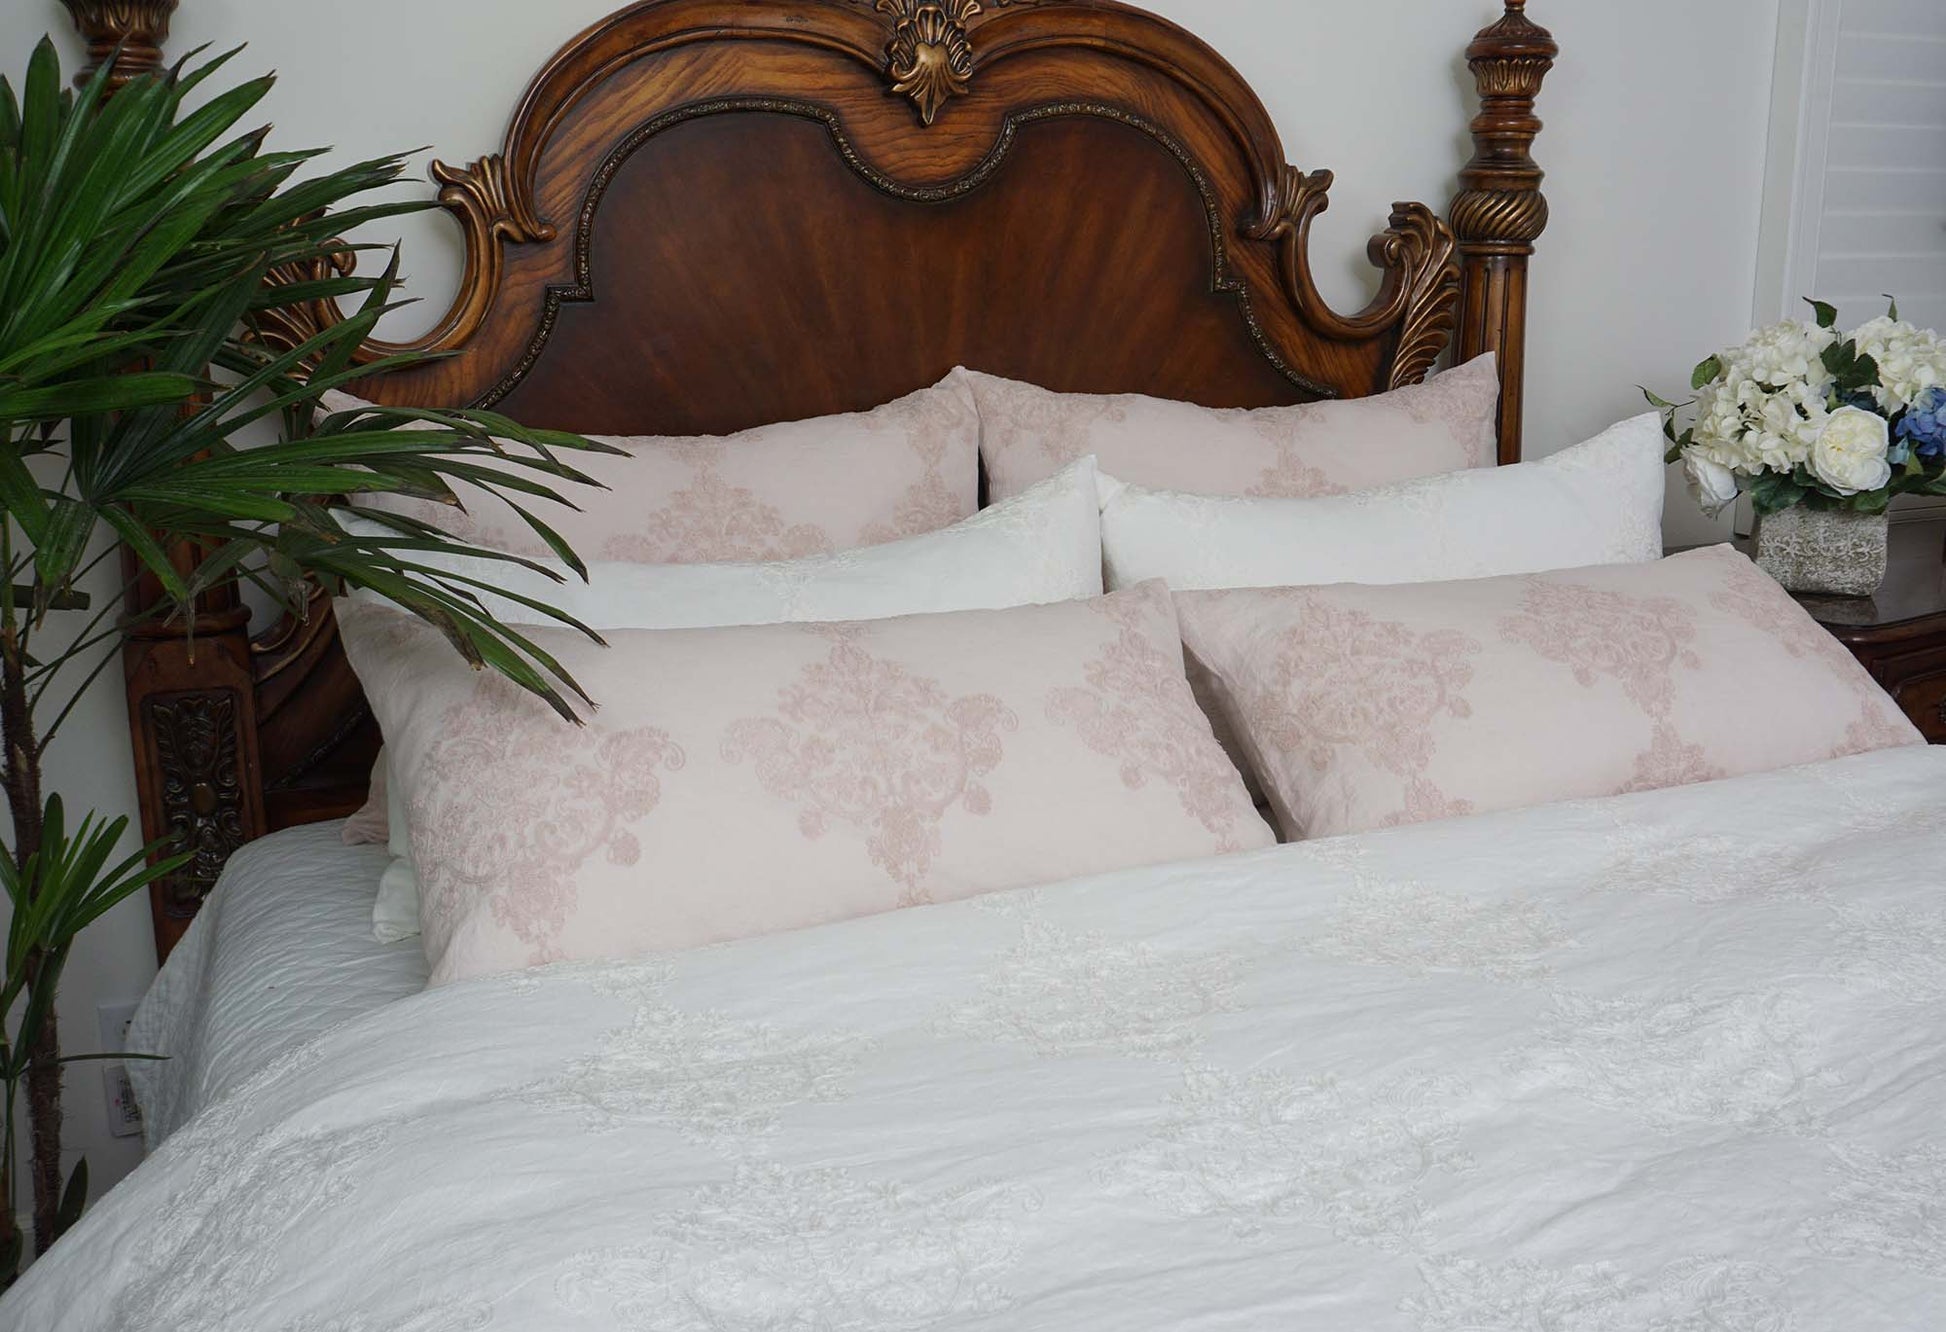 Shop Duvet Cover and Shams online for luxurious bedding